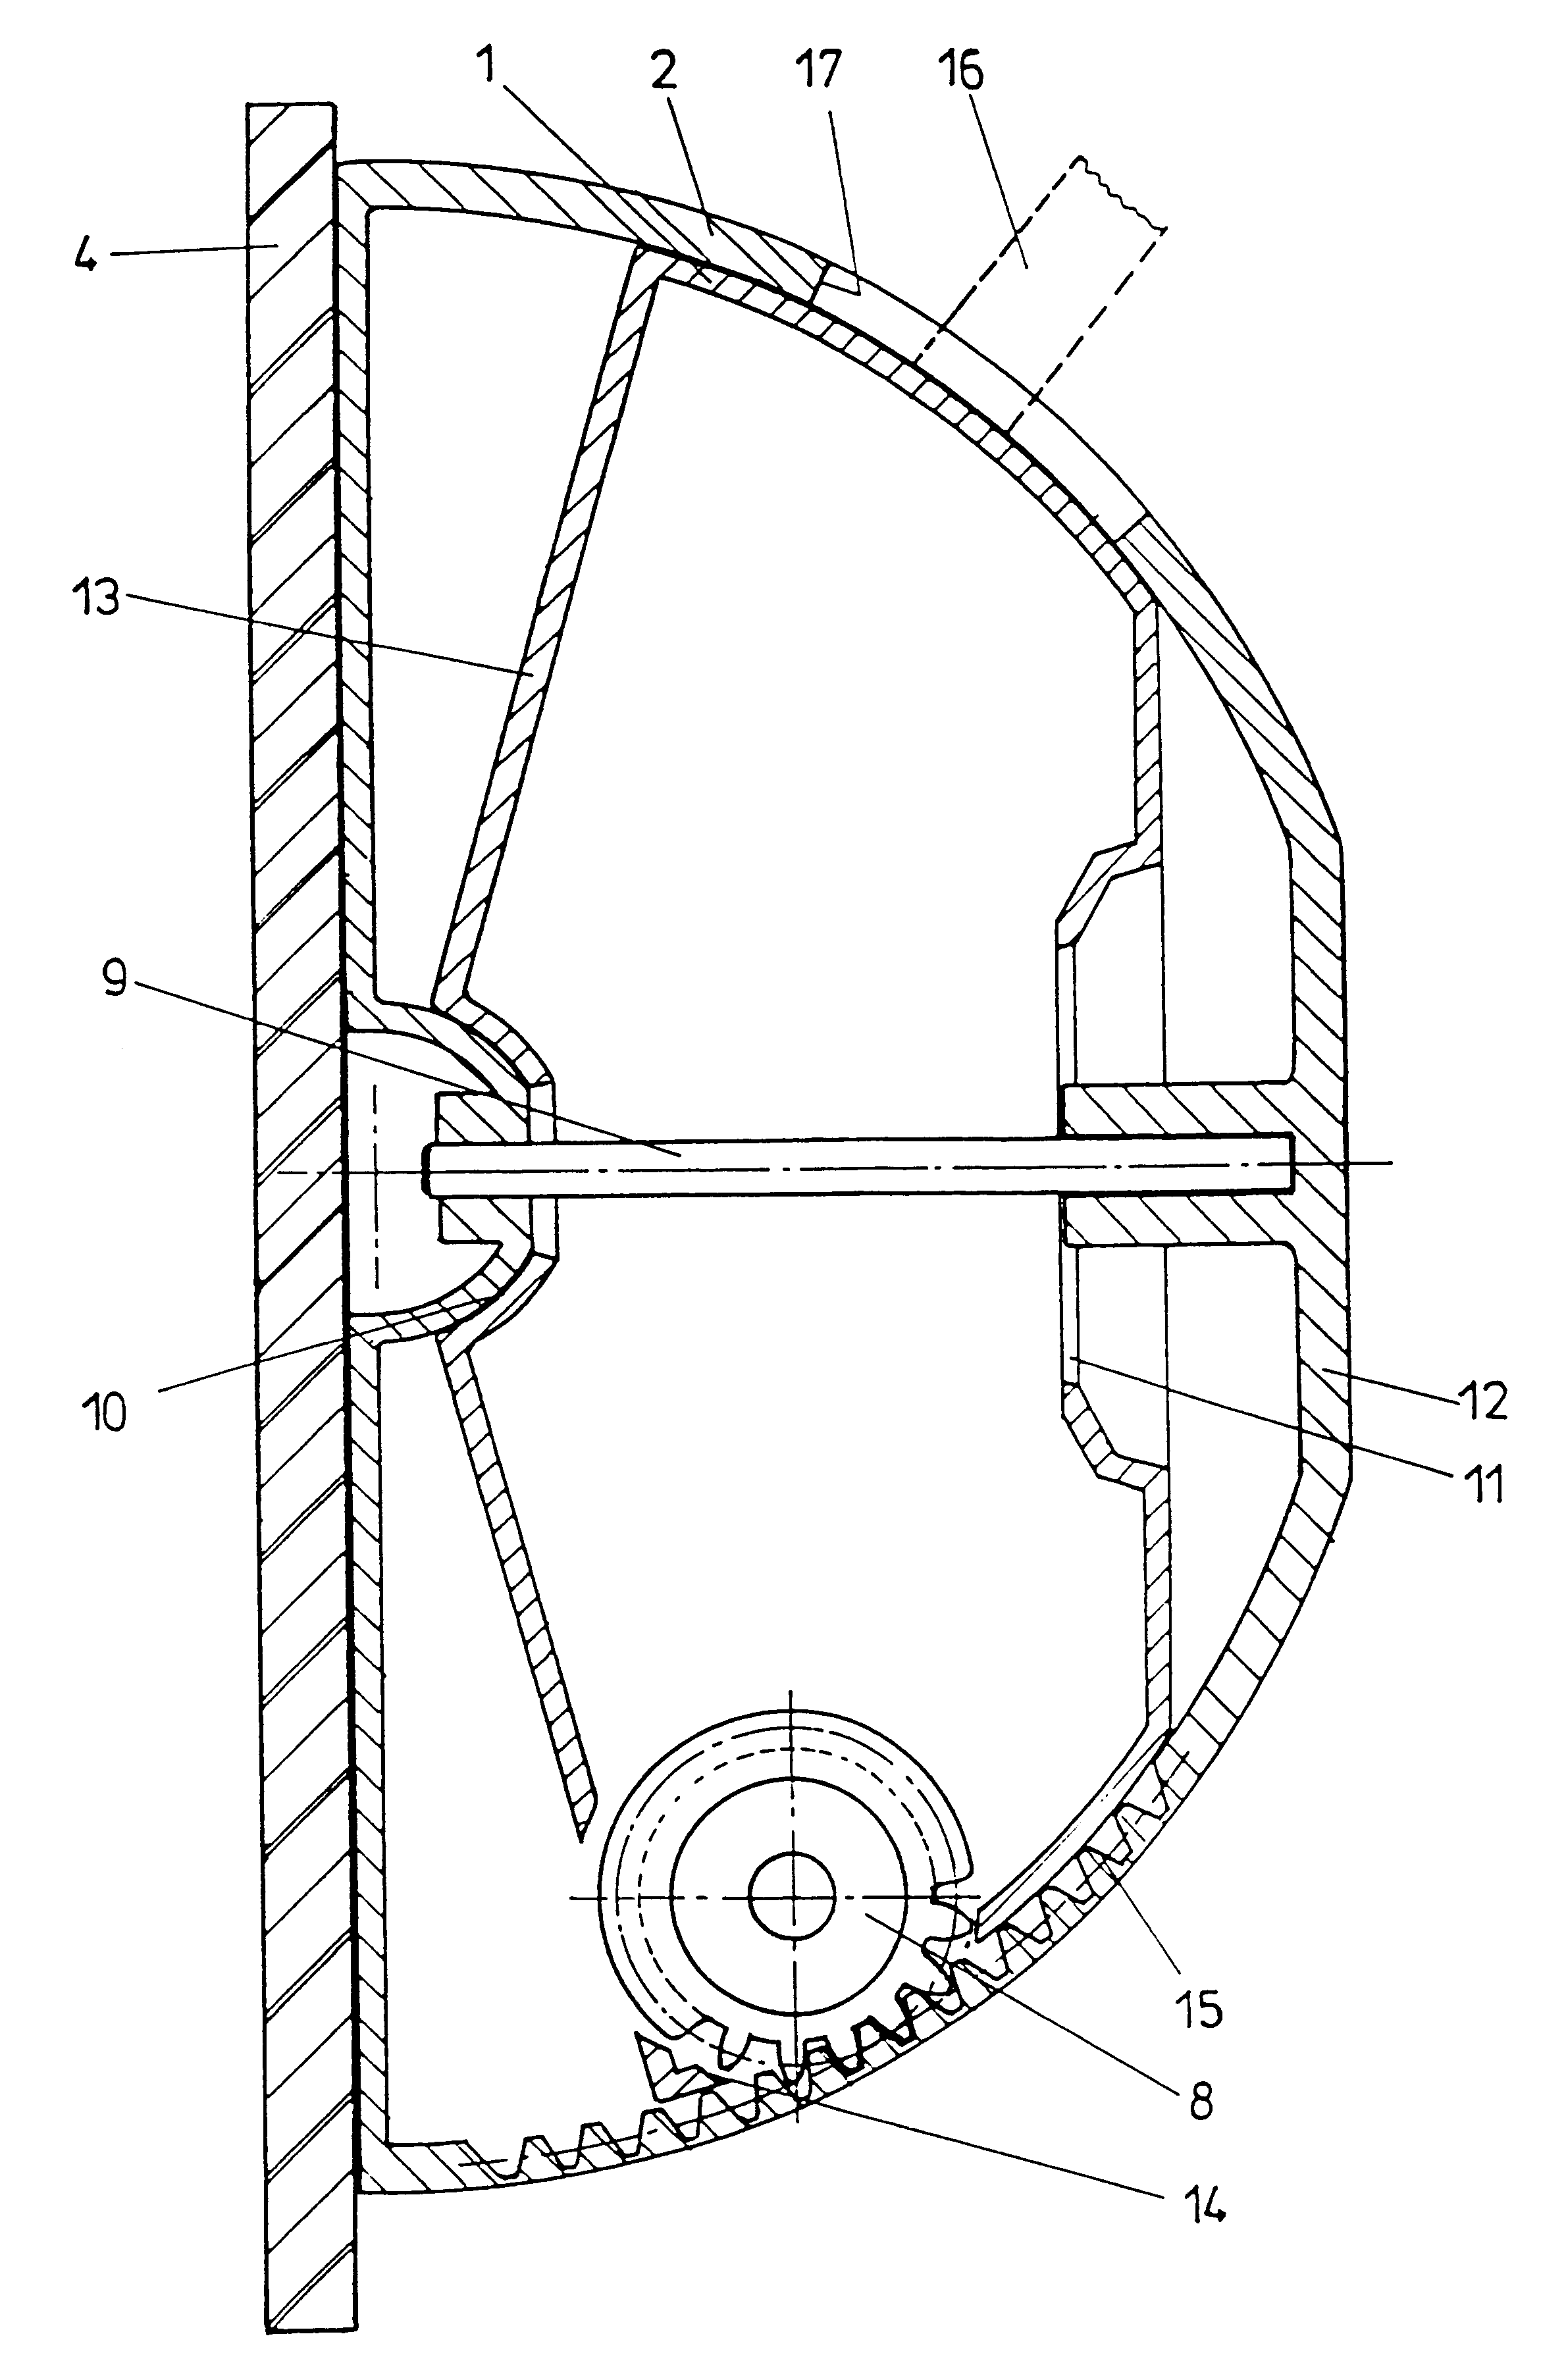 Adjustable rear-view mirror for a vehicle